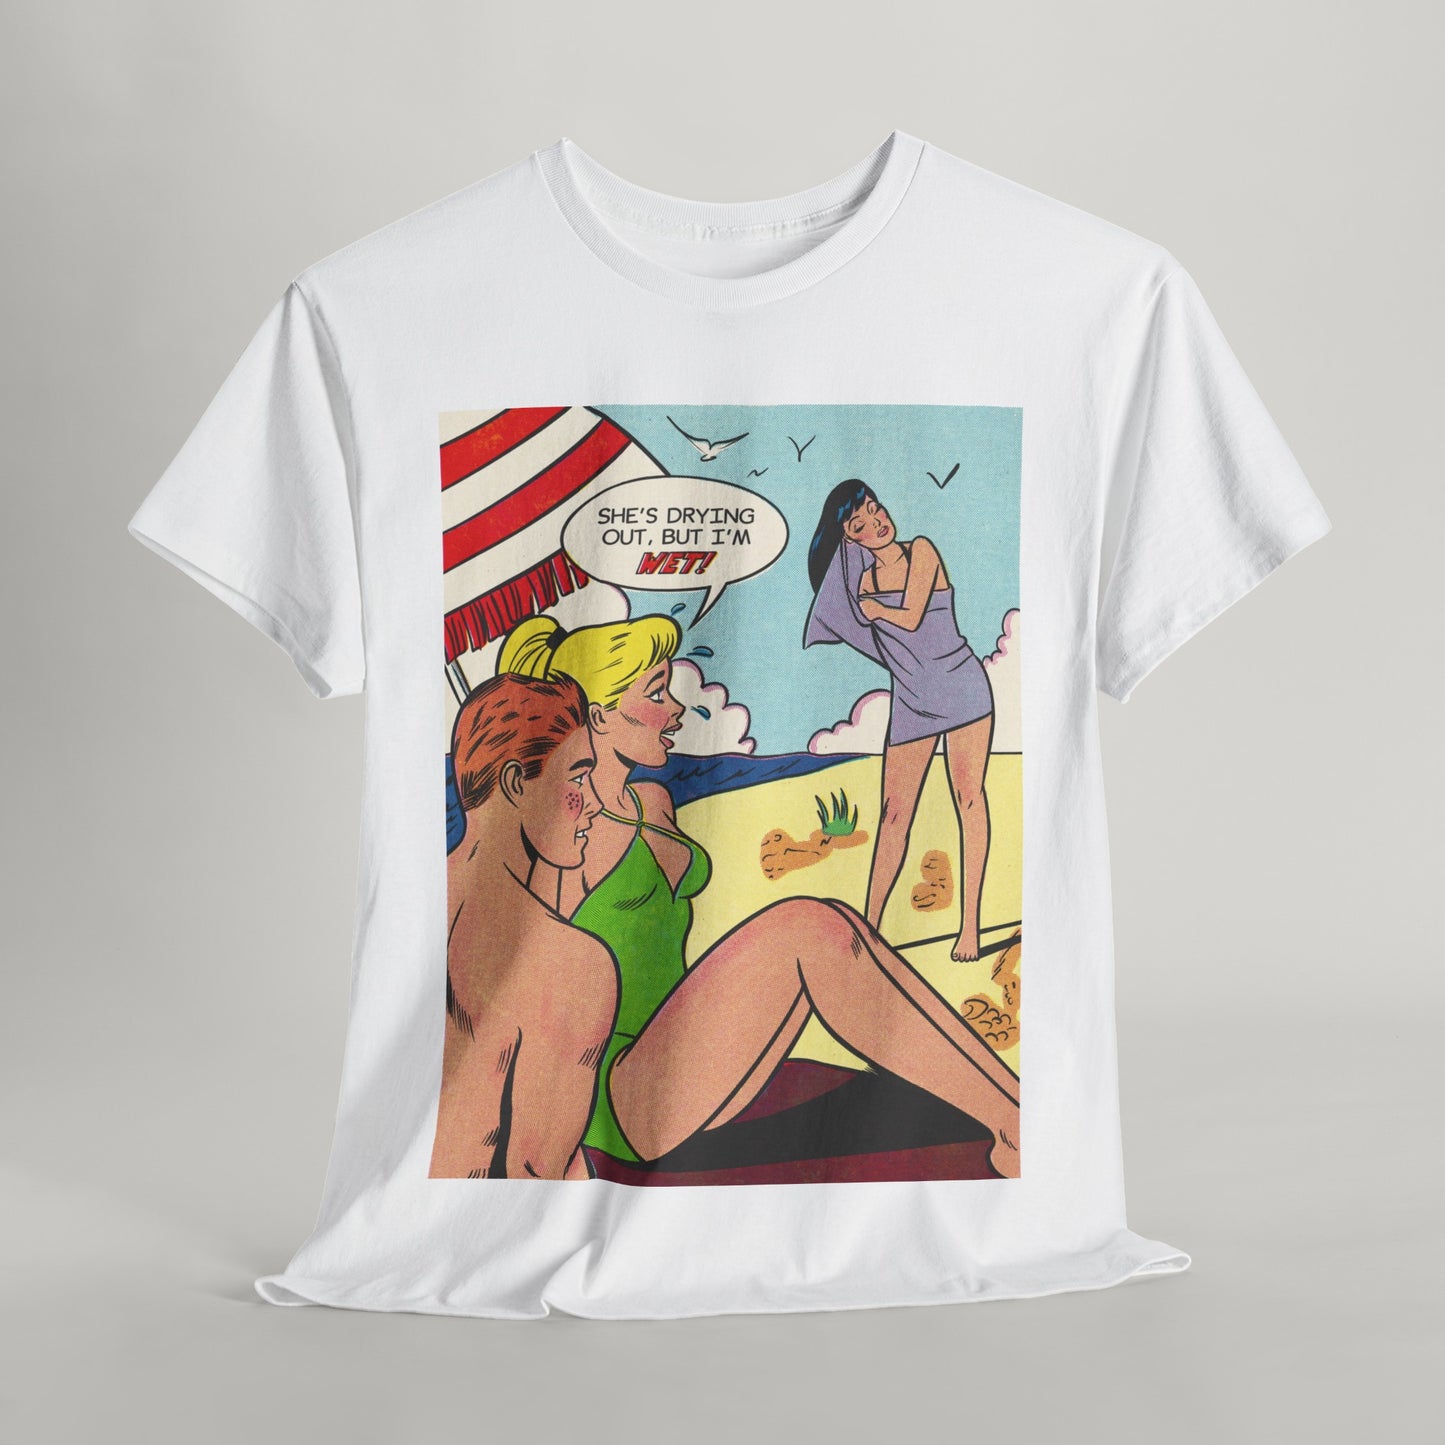 I'm Wet Tee by Msbhaive